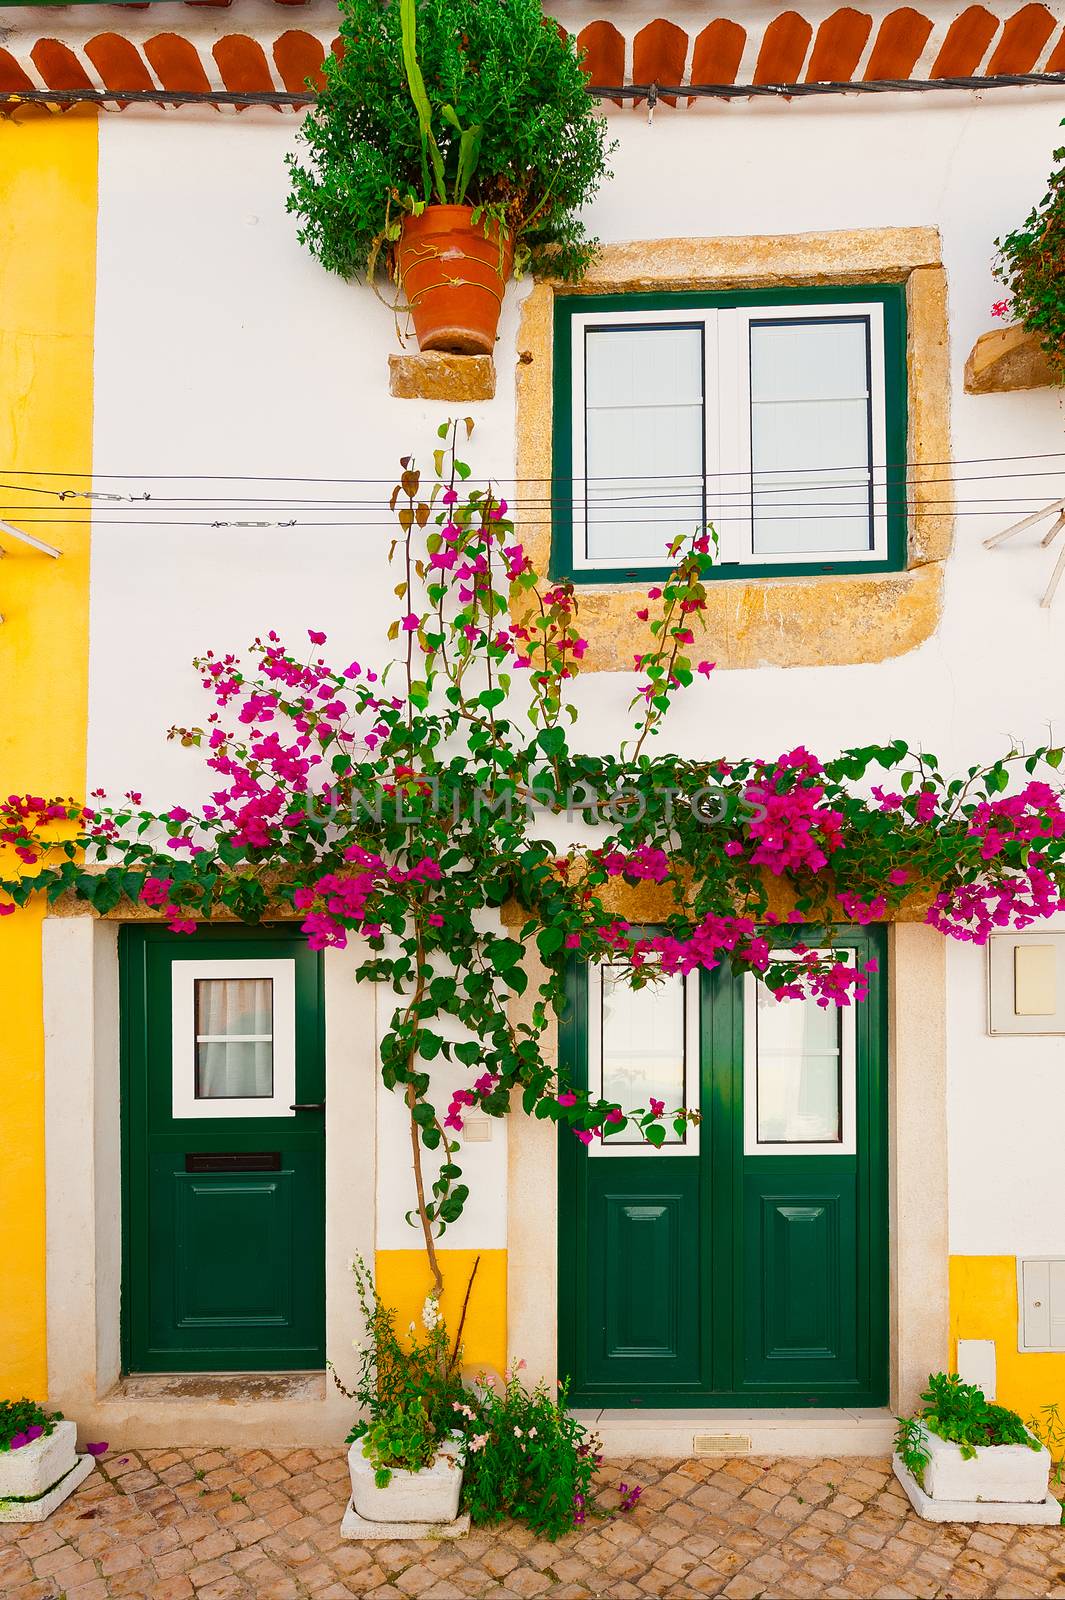  Facade of Portuguese House with Door and Windows Decorated with Fresh Flowers